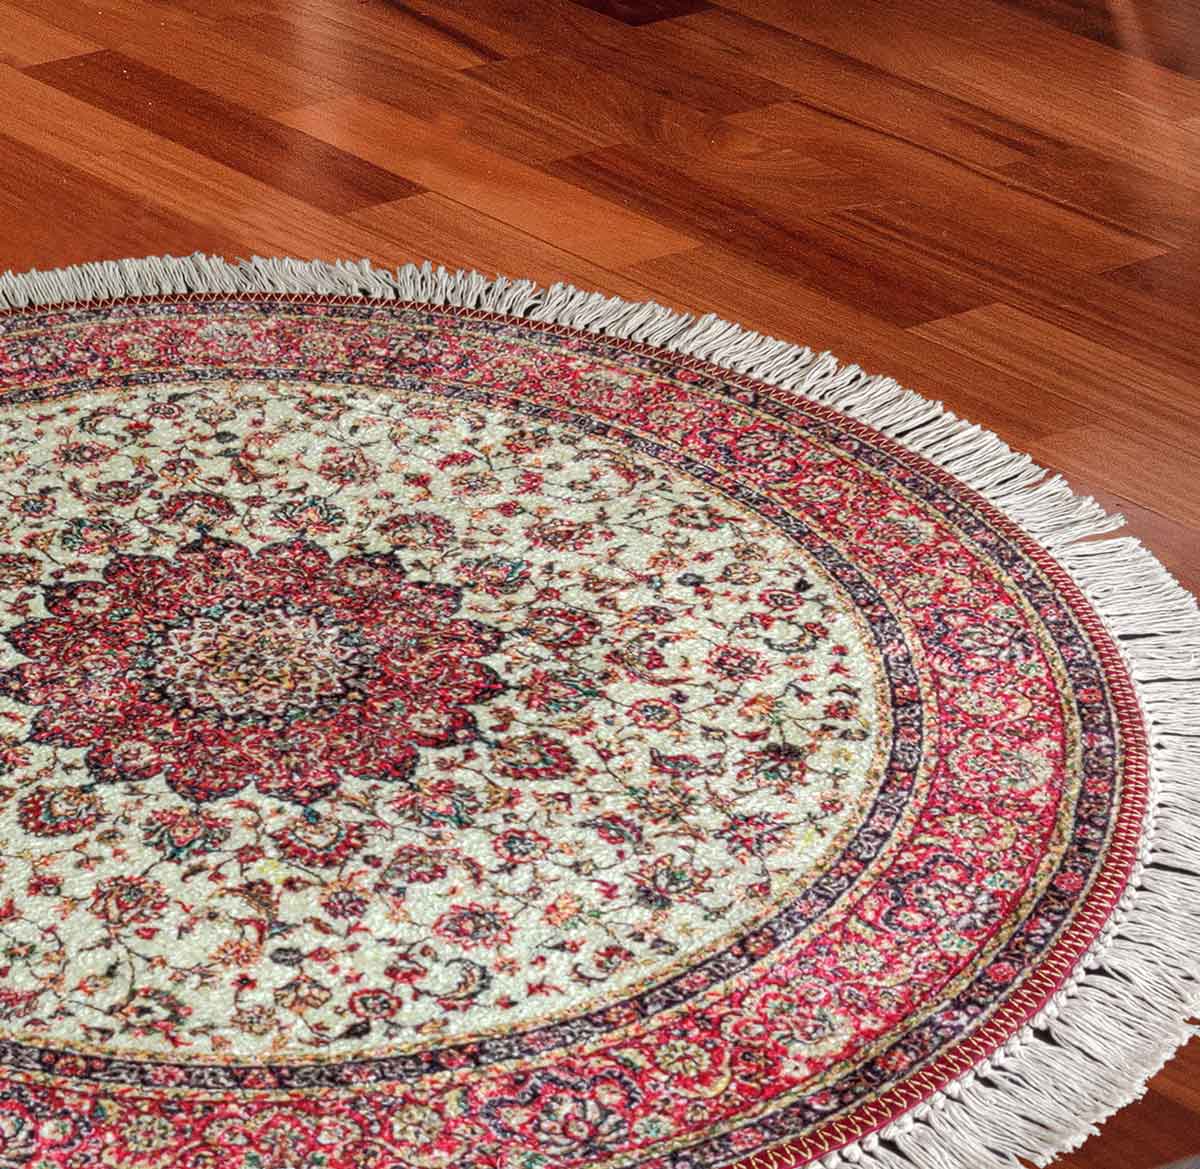 Avioni Persian Carpets For Living Room – Round -Red Floral